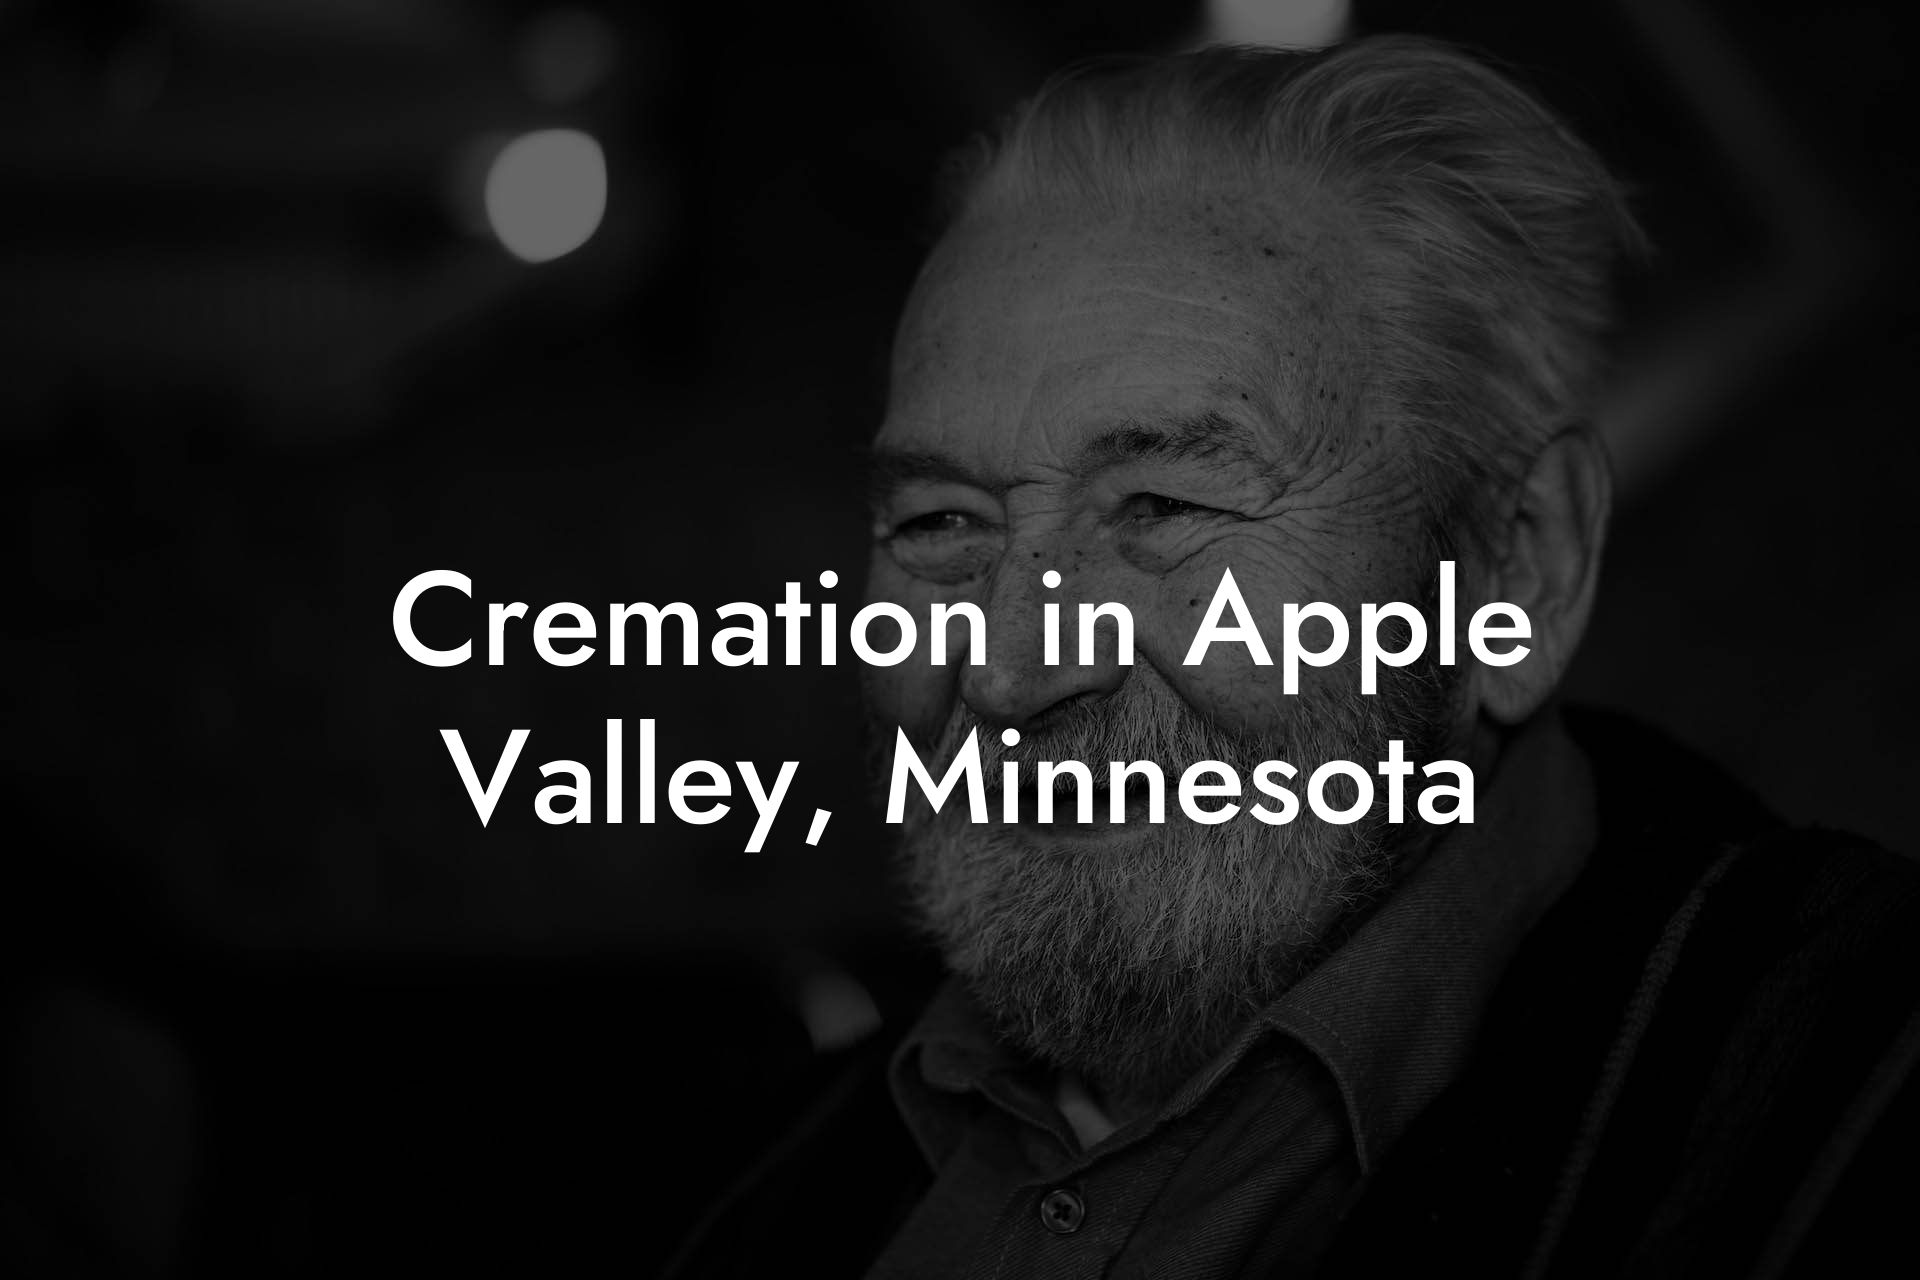 Cremation in Apple Valley, Minnesota